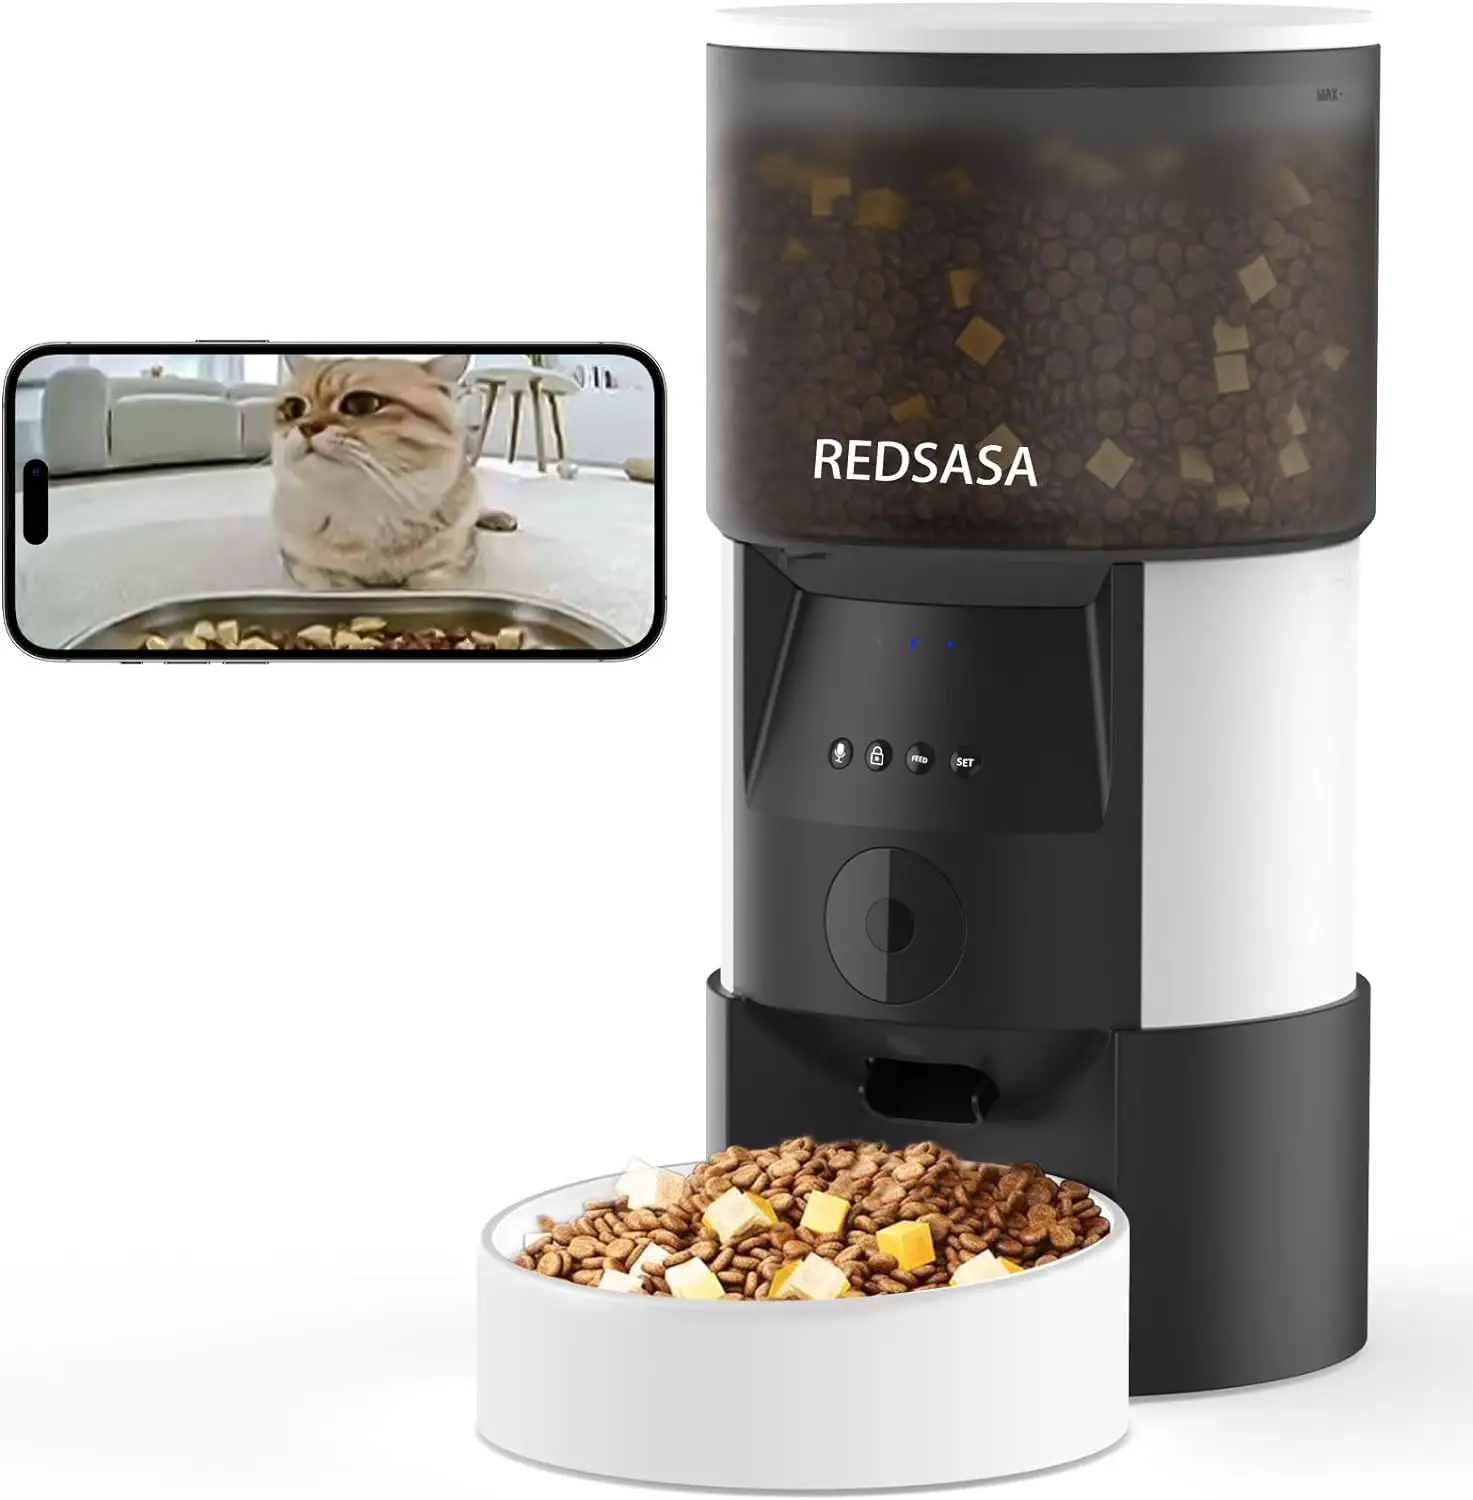 REDSASA Automatic Cat Feeder with Camera, WiFi-Enabled Cat Feeder with APP 2 Way Audio, 3L Automatic Cat Food Dispenser with Night Vision1080P HD Video, Up to 20 Portions 1-8 Meals Per Day